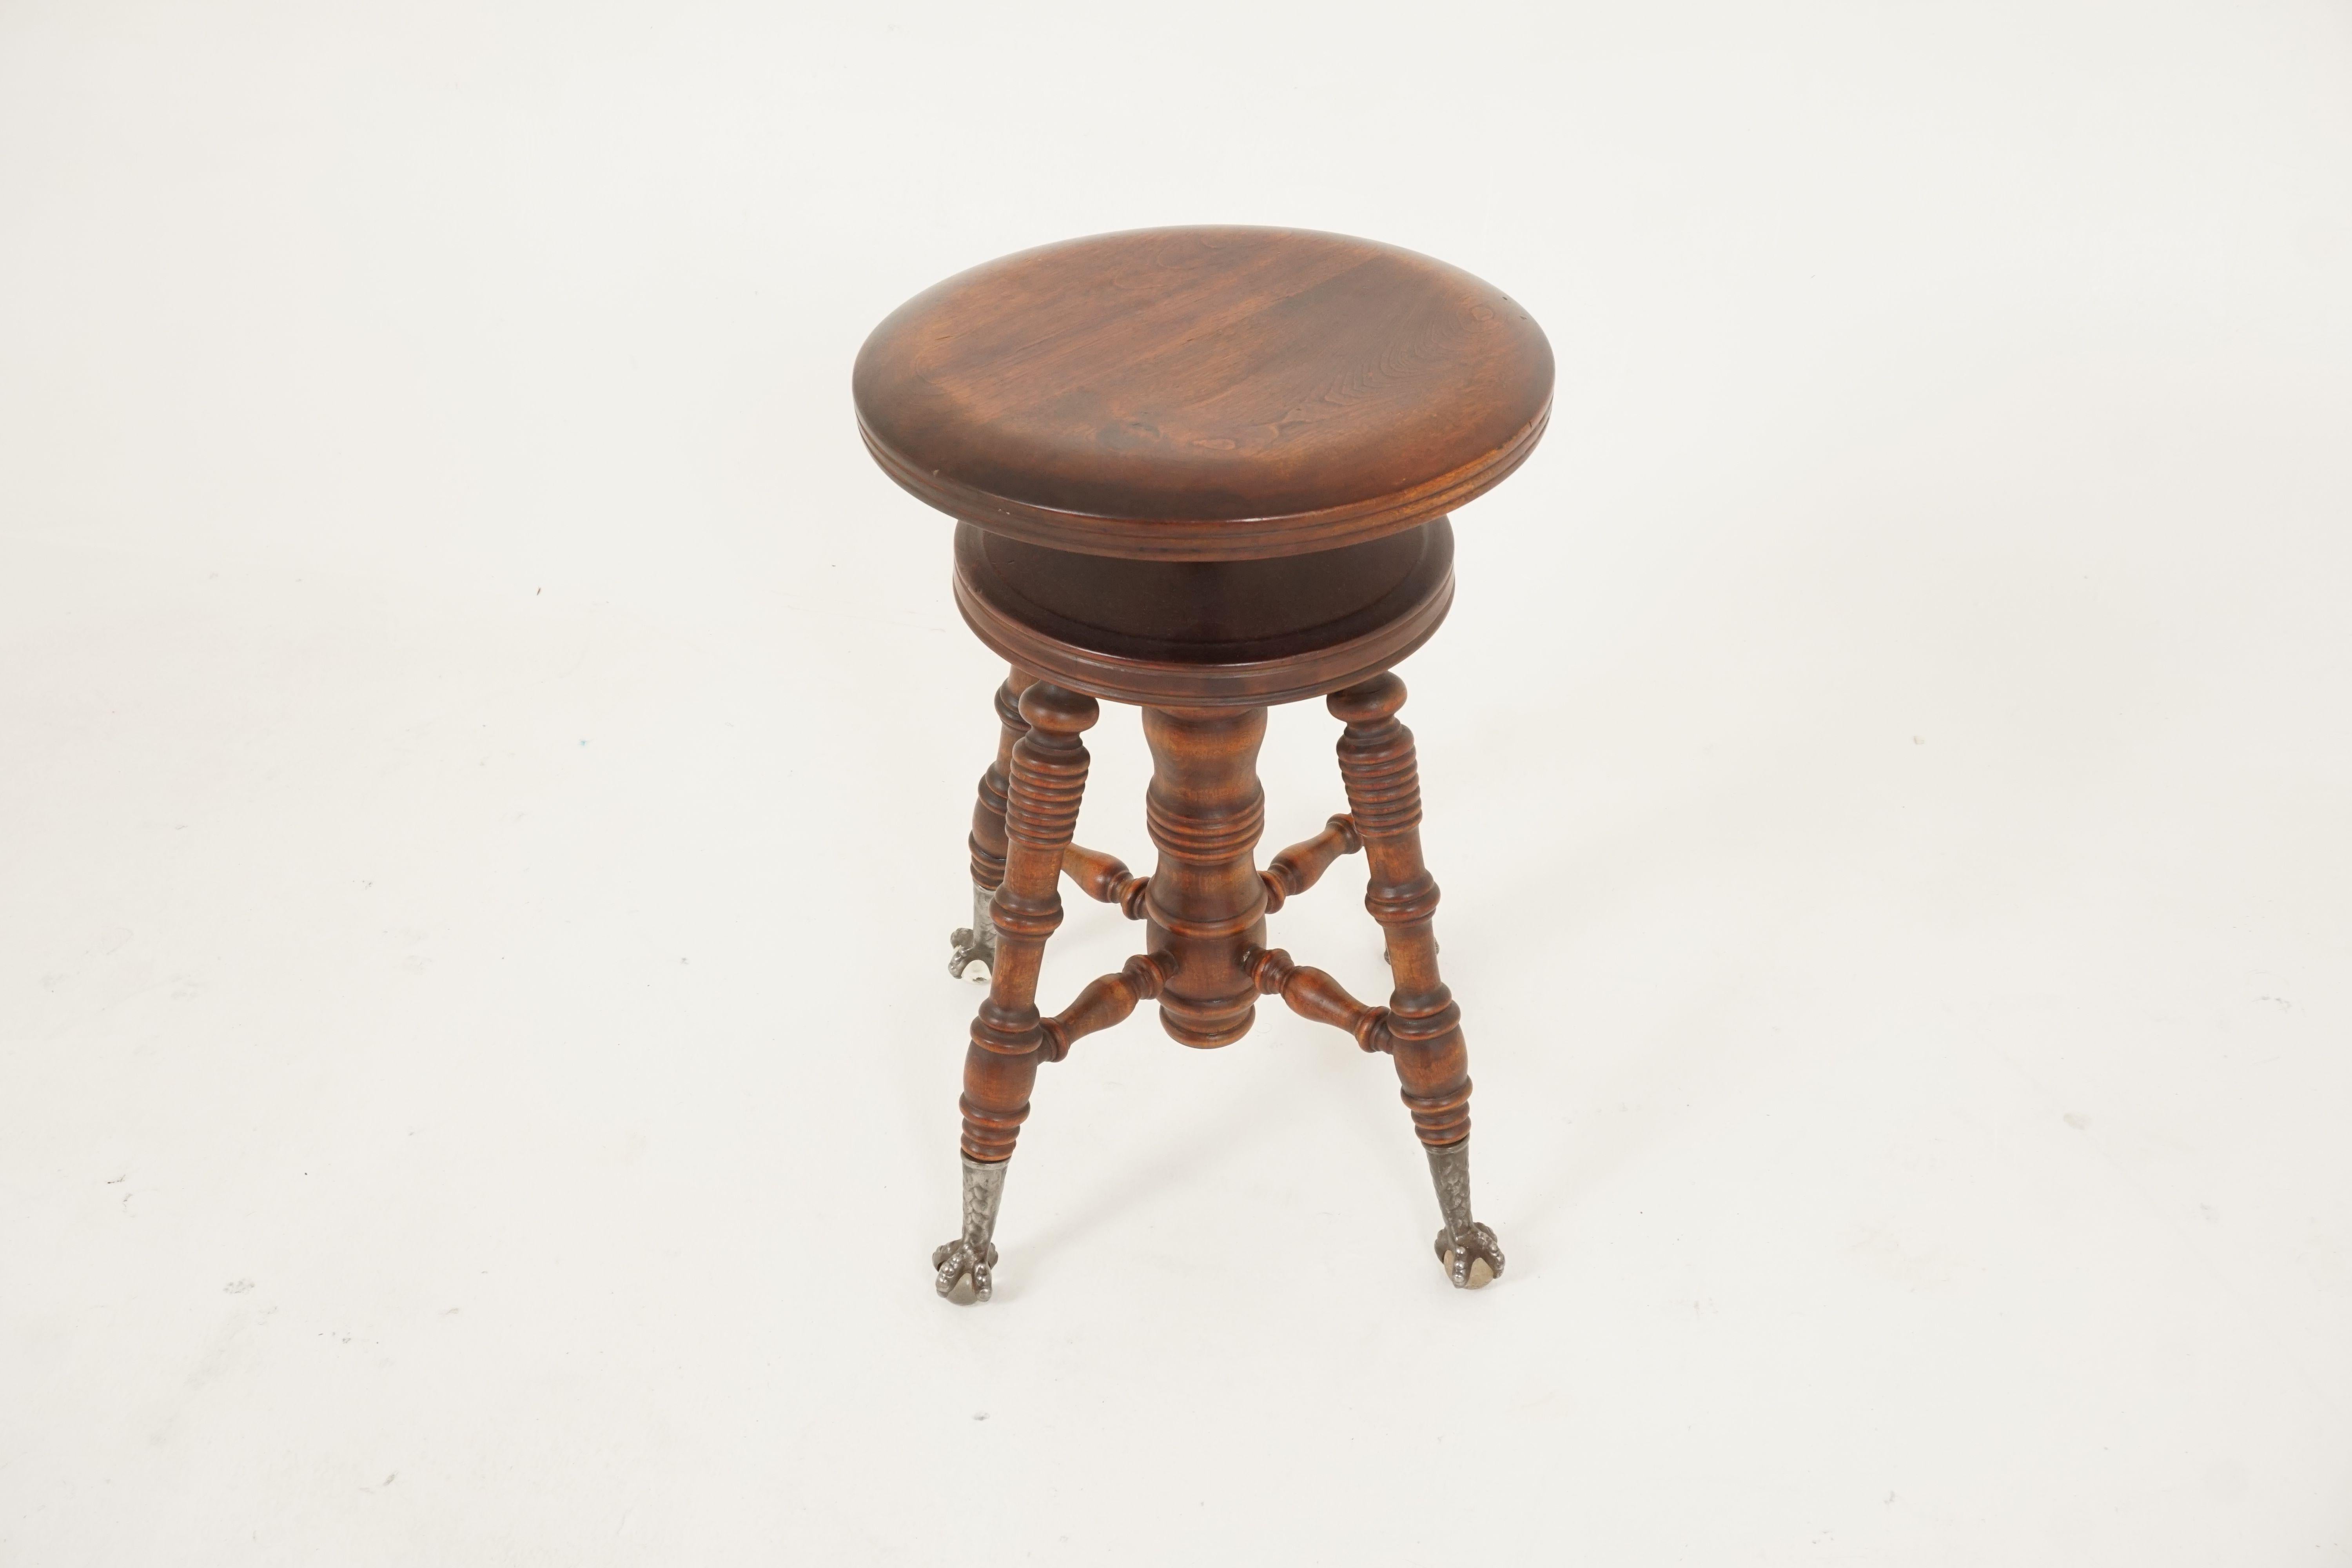 Antique Victorian stool, beechwood, revolving piano stool, American 1900, B2514

American 1900
Solid beechwood
Original finish
Round shaped seat with working rise and fall action
Fine turned legs finished in a gilt metal claw with original